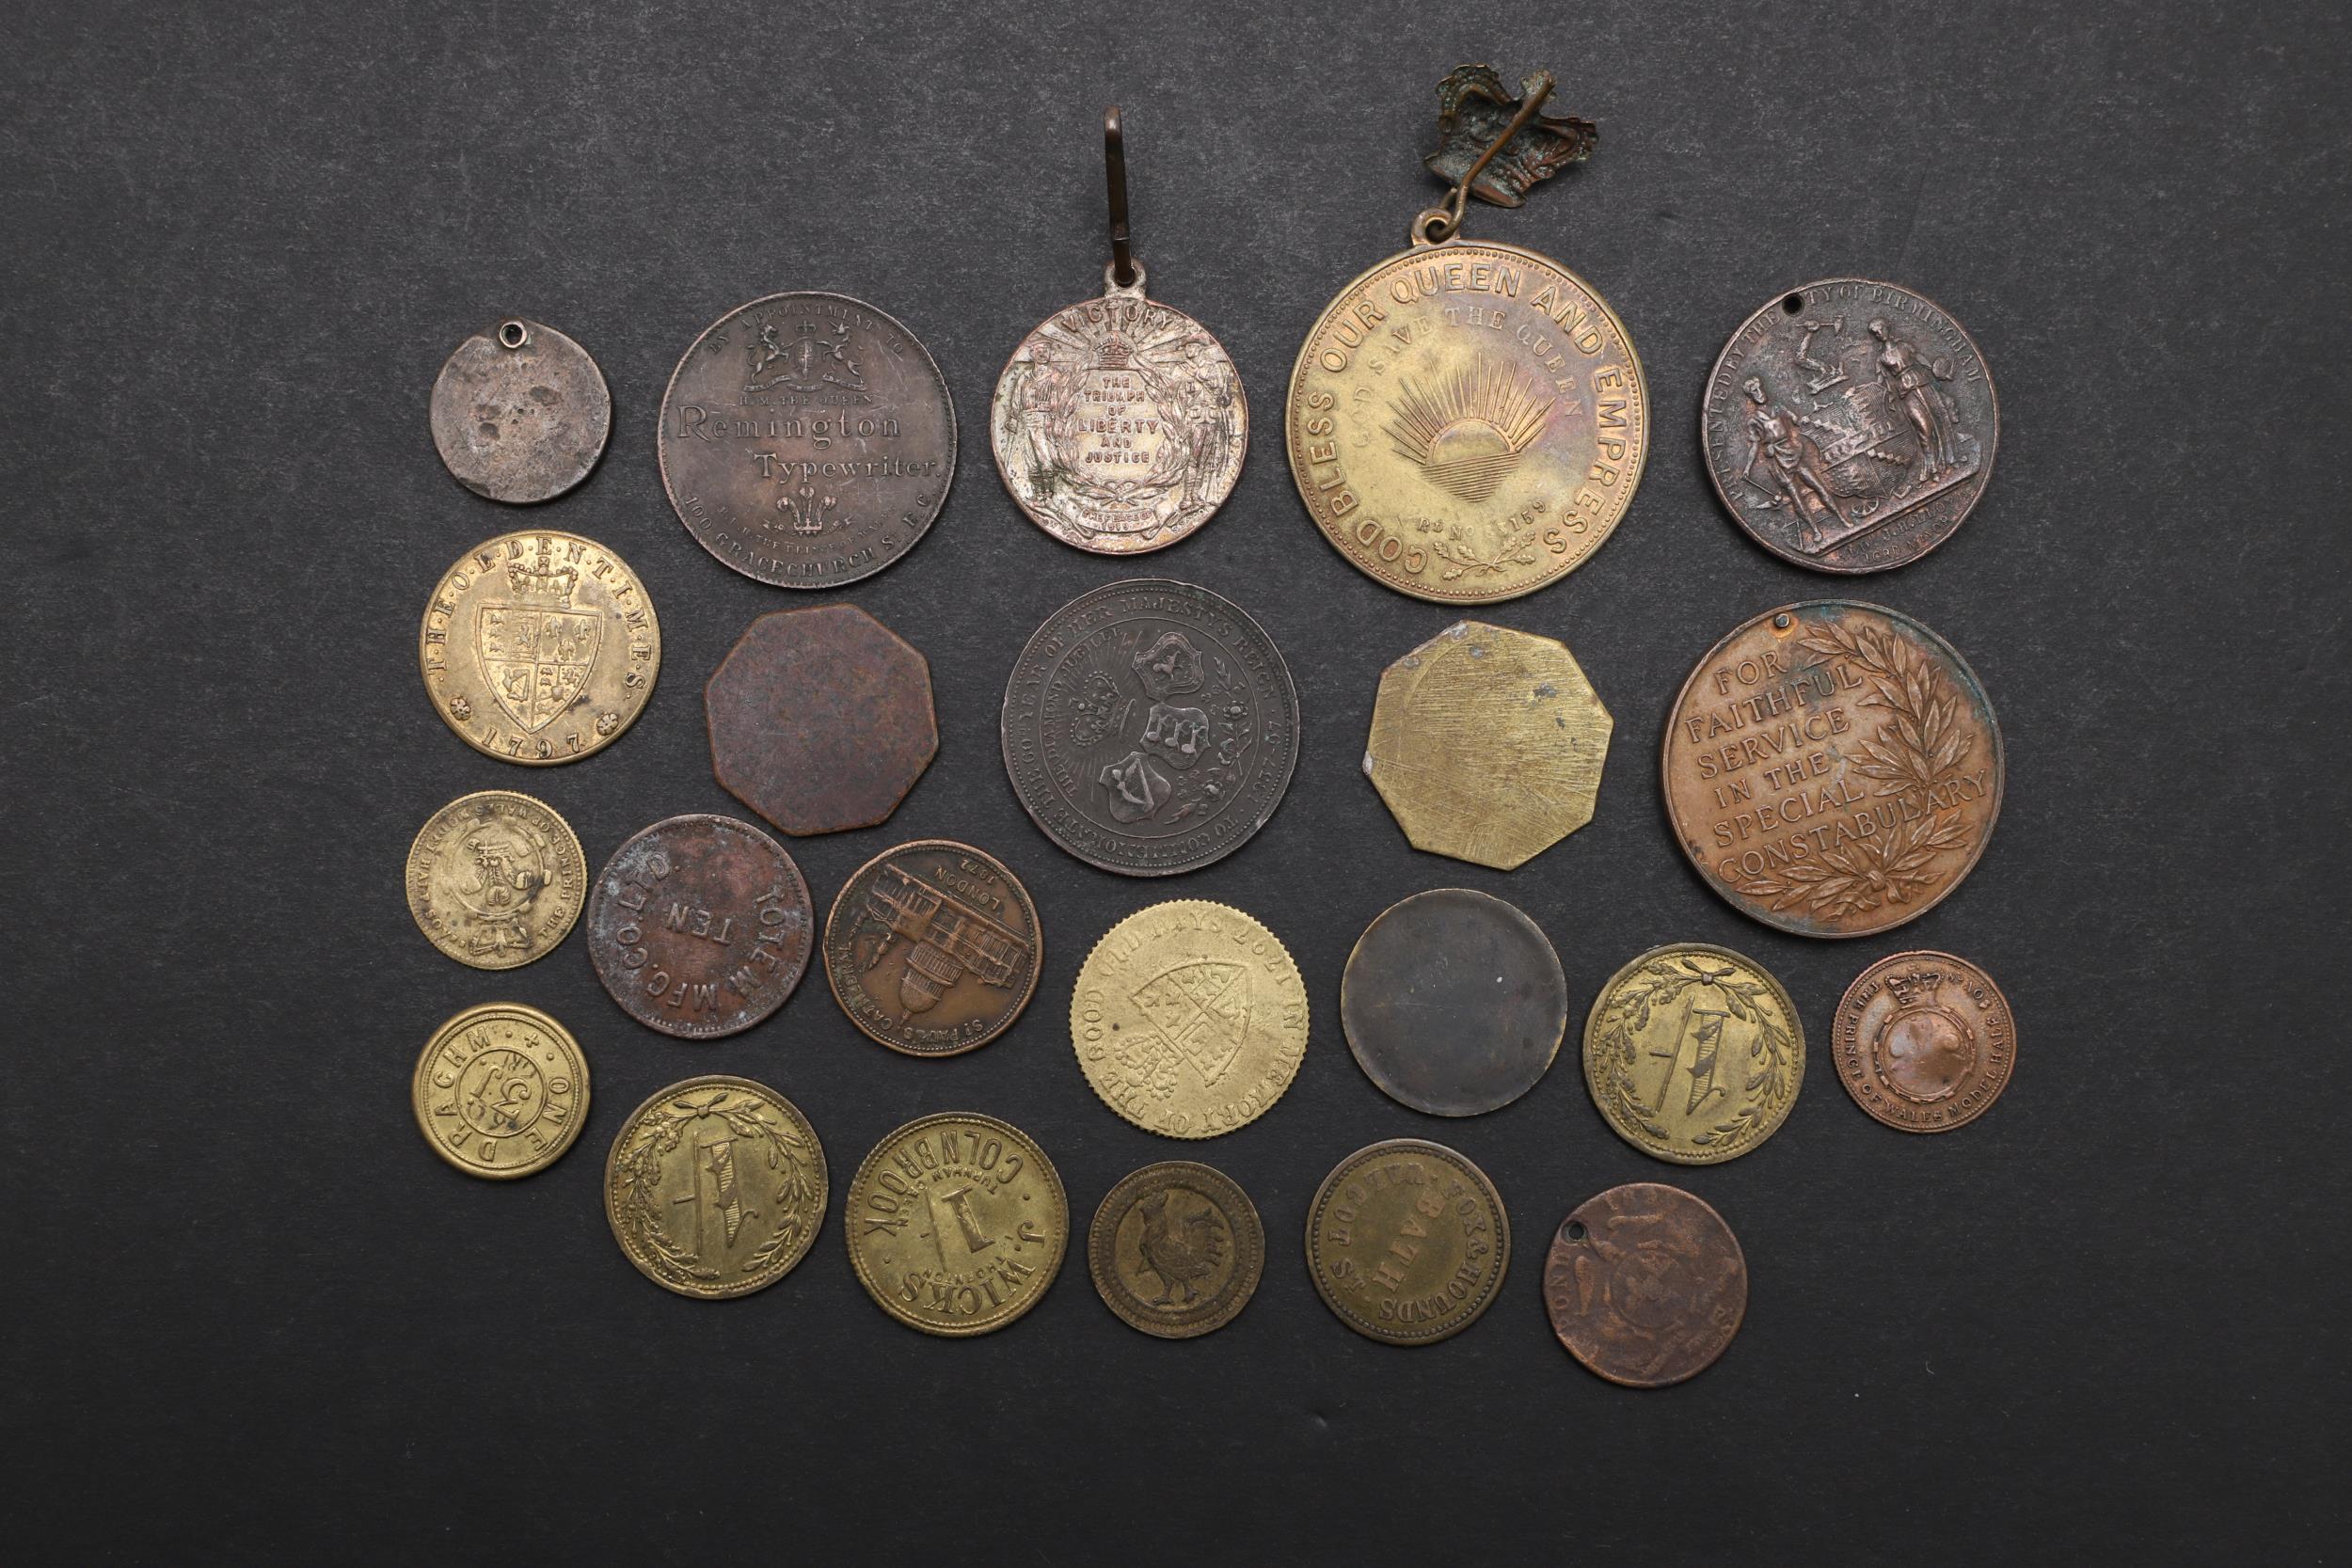 A MIXED COLLECTION OF TWENTY THREE COMMEMORATIVE MEDALS AND GAMING TOKENS. - Image 2 of 3